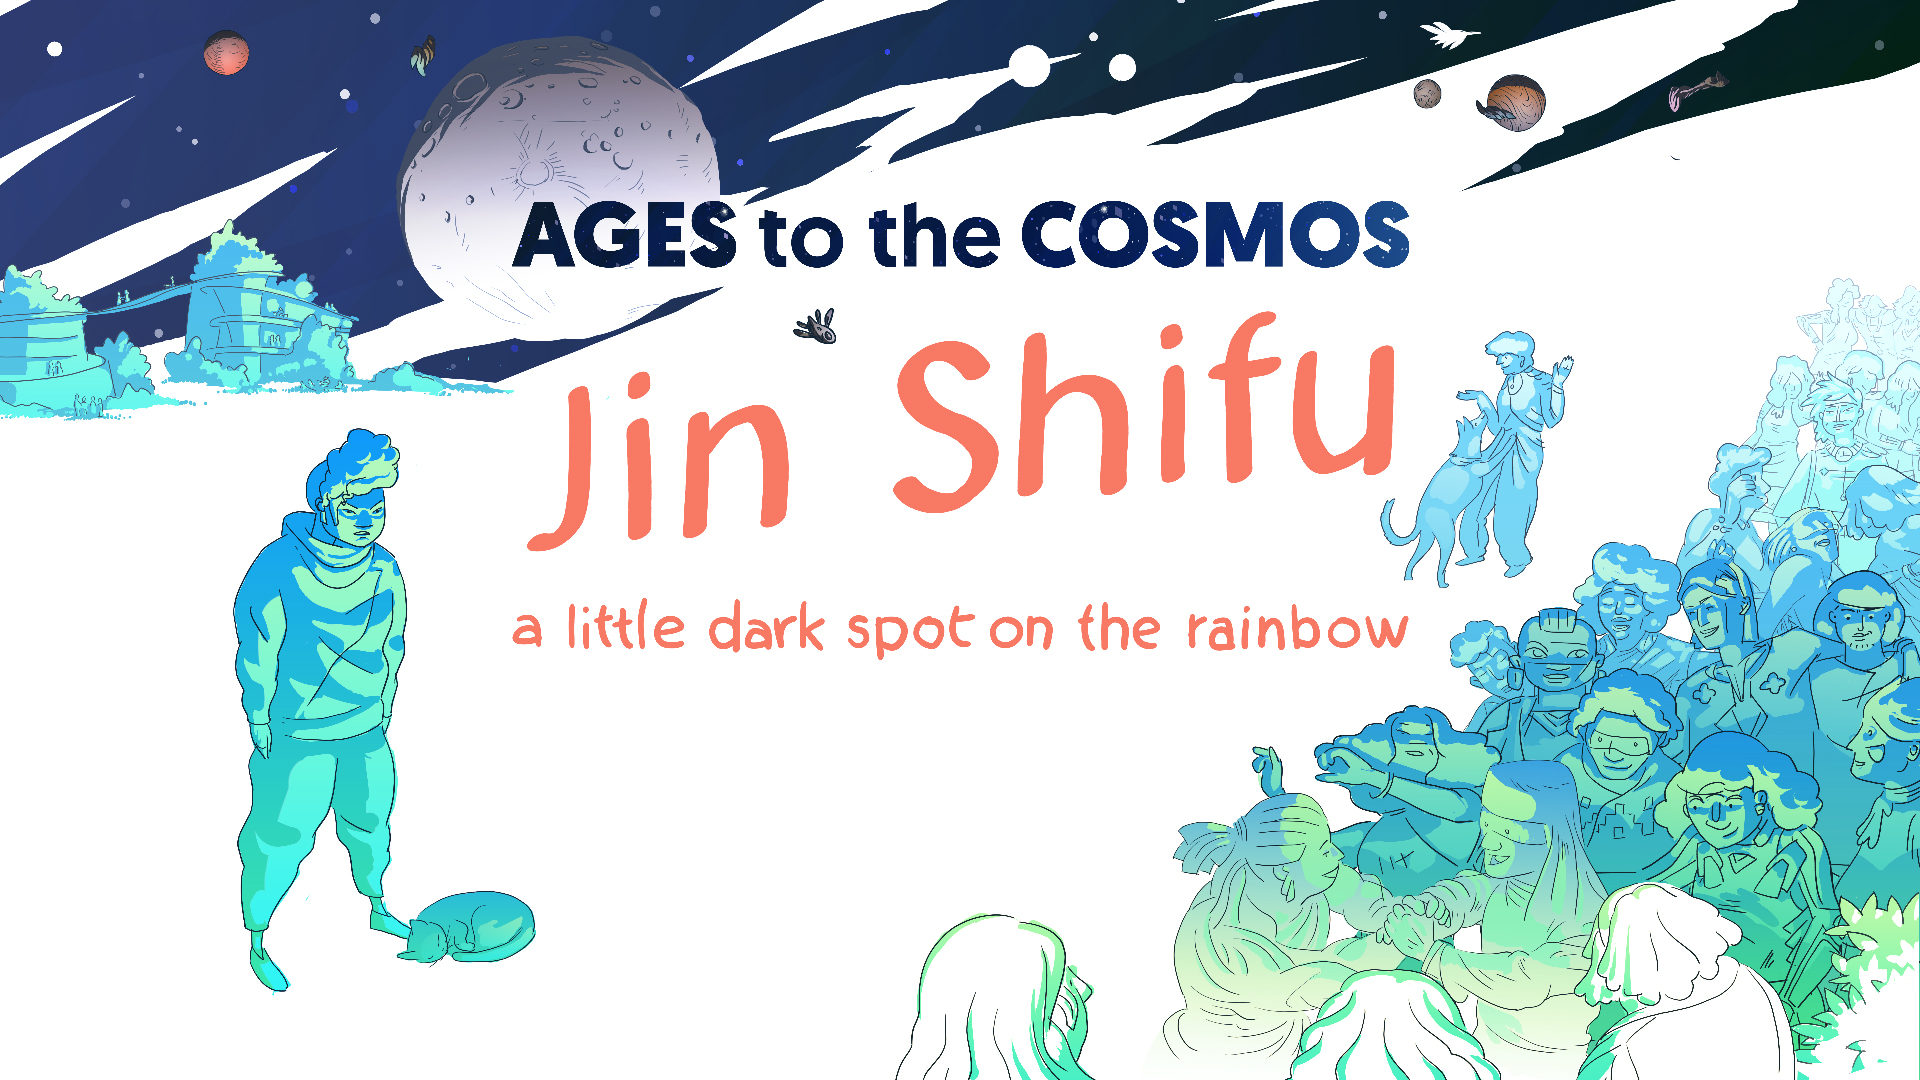 Poster trailer of AGES to the COSMOS – Jin Shifu